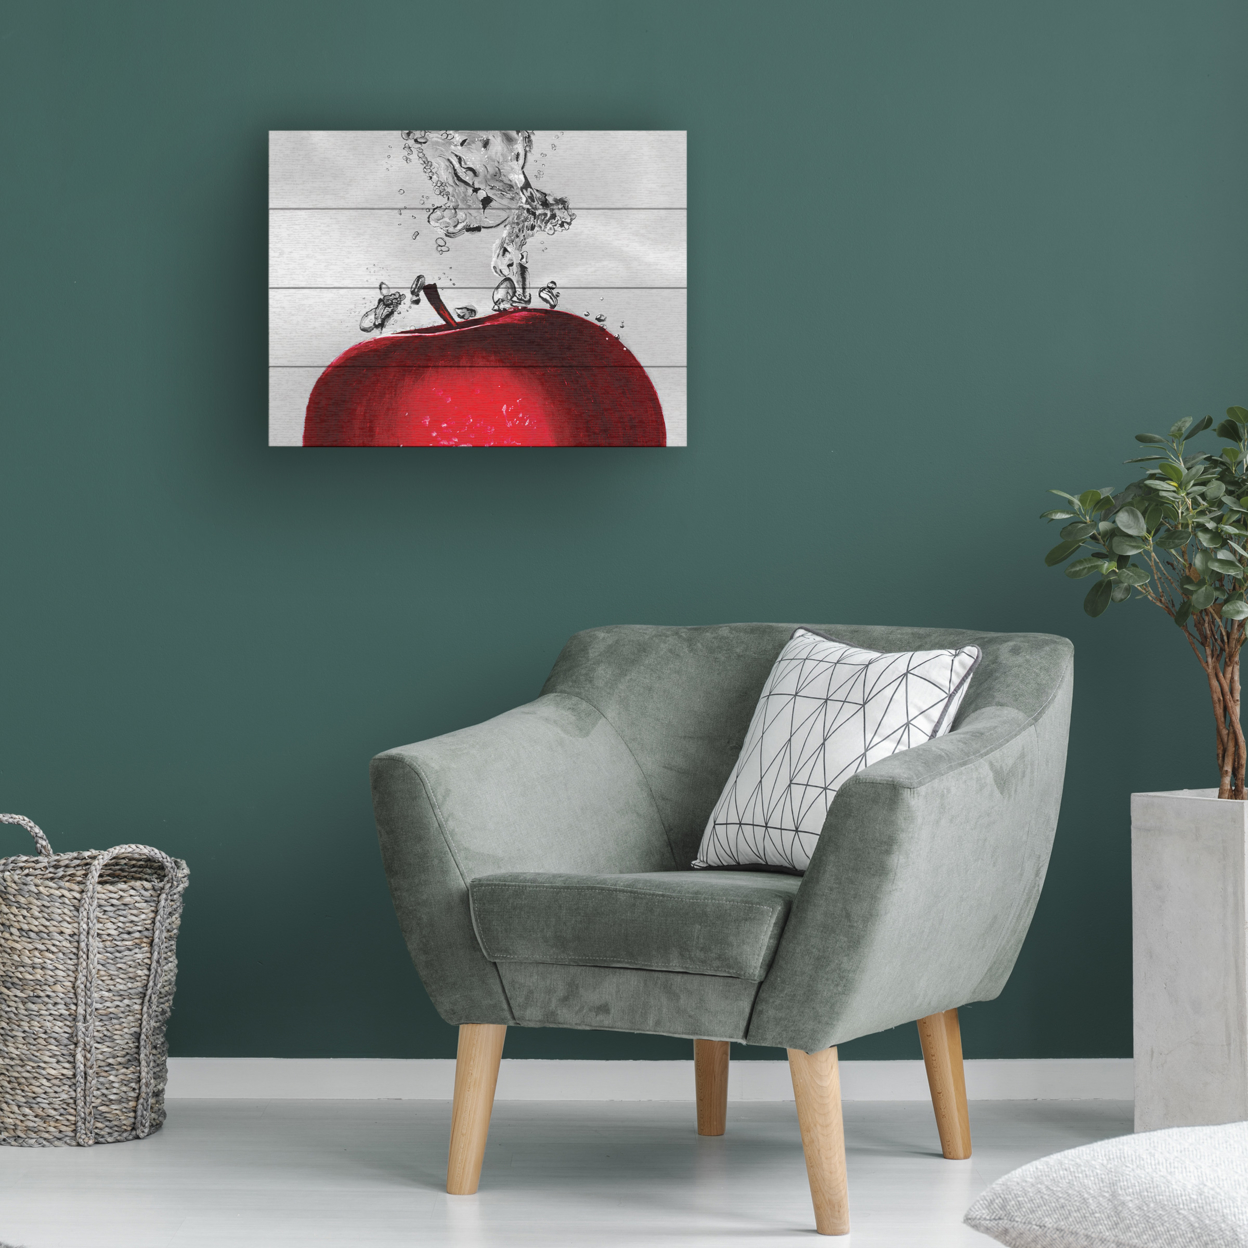 Wall Art 12 X 16 Inches Titled Red Apple Splash Ready To Hang Printed On Wooden Planks